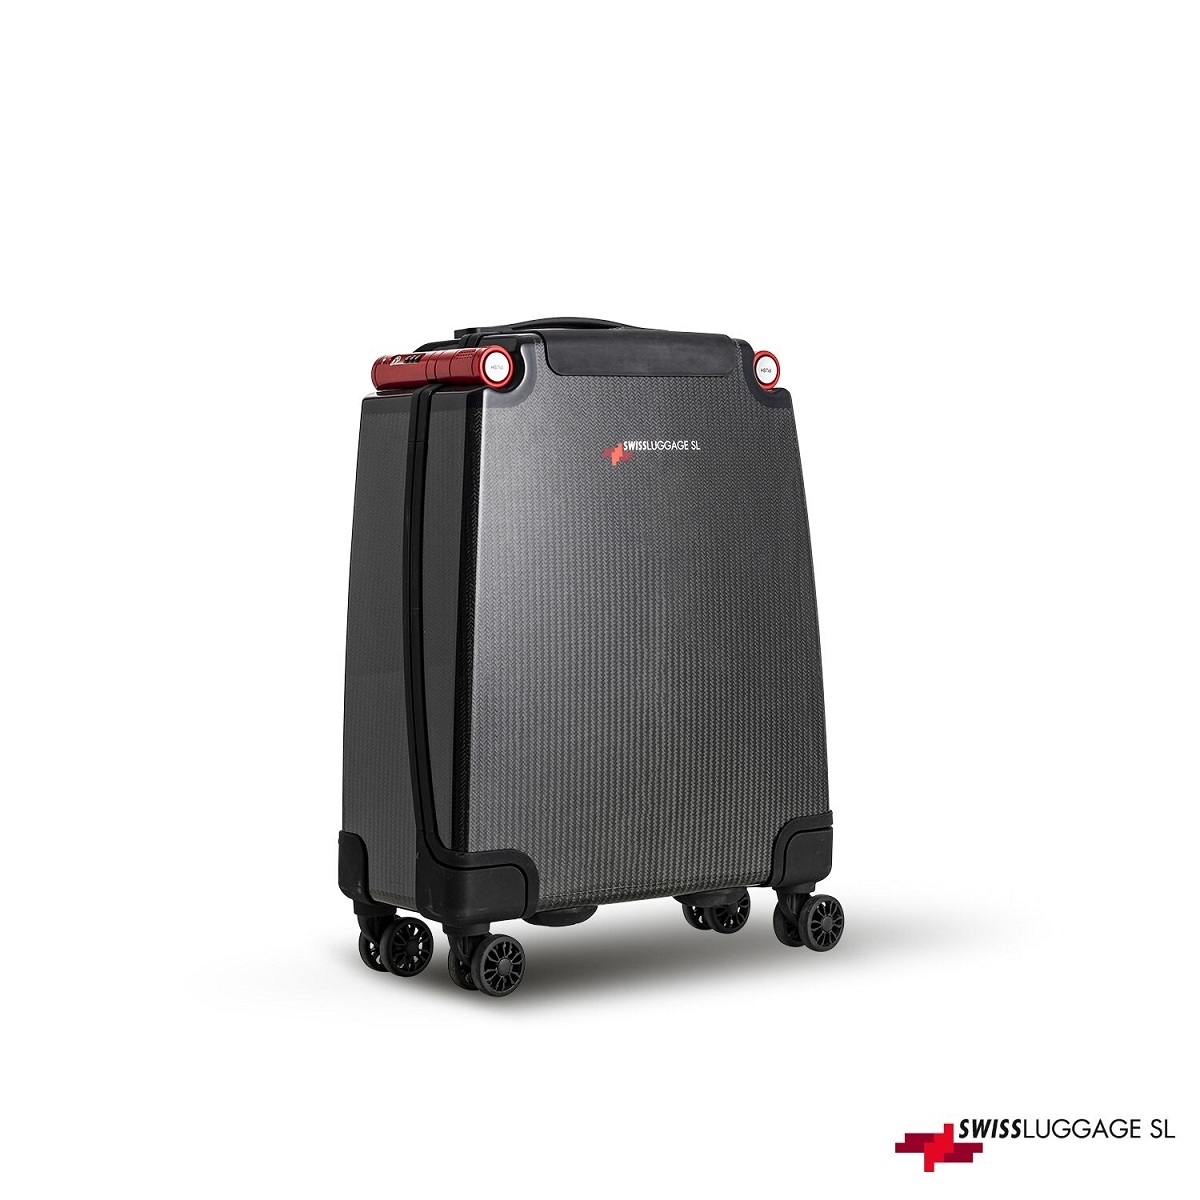 The Trolley Fifty Five - 4W Rot von Swiss Luggage